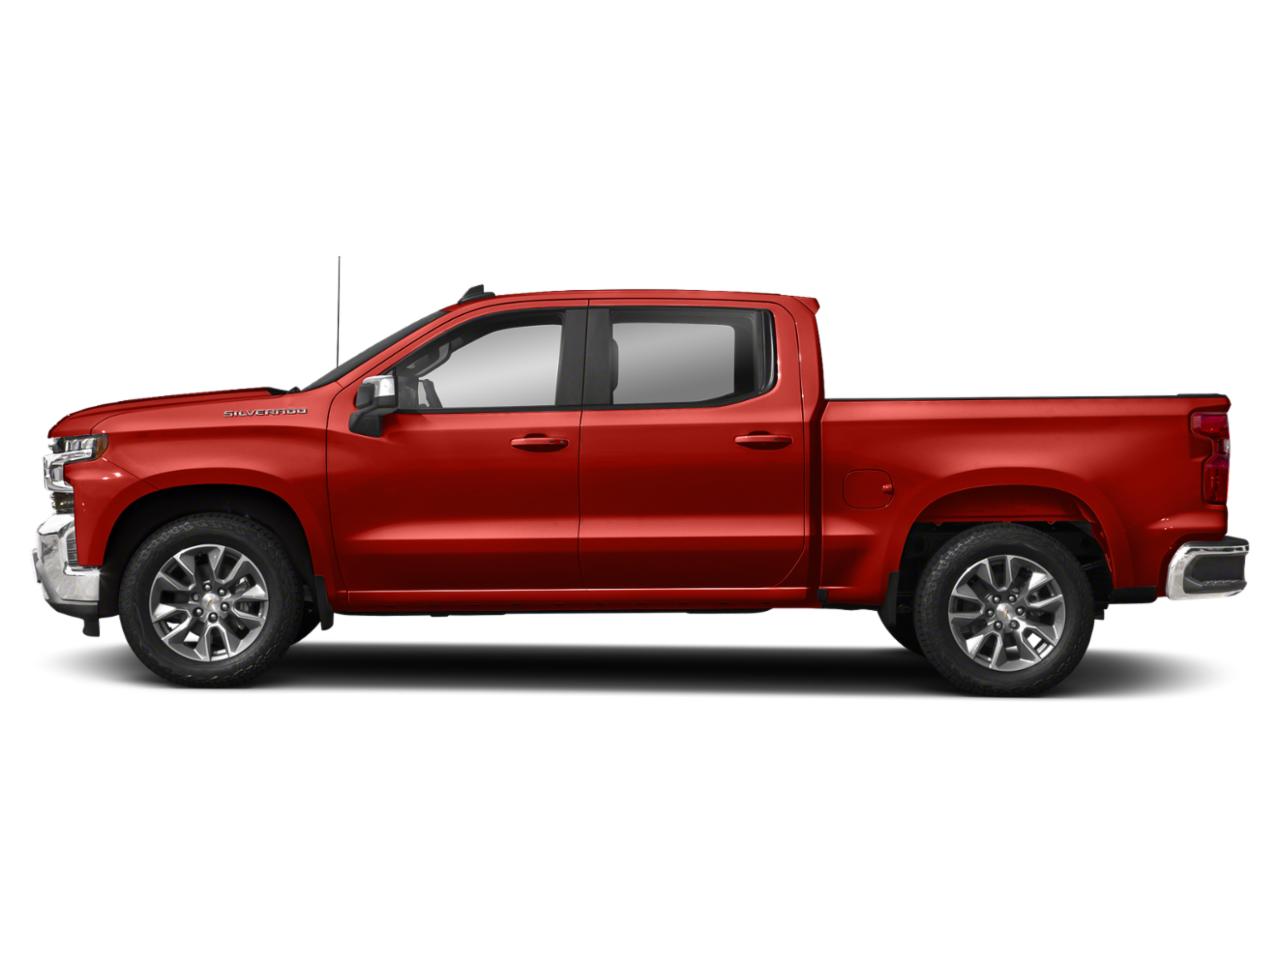 Used 2020 Chevrolet Silverado 1500 RST with VIN 3GCUYEED0LG434857 for sale in Truman, Minnesota